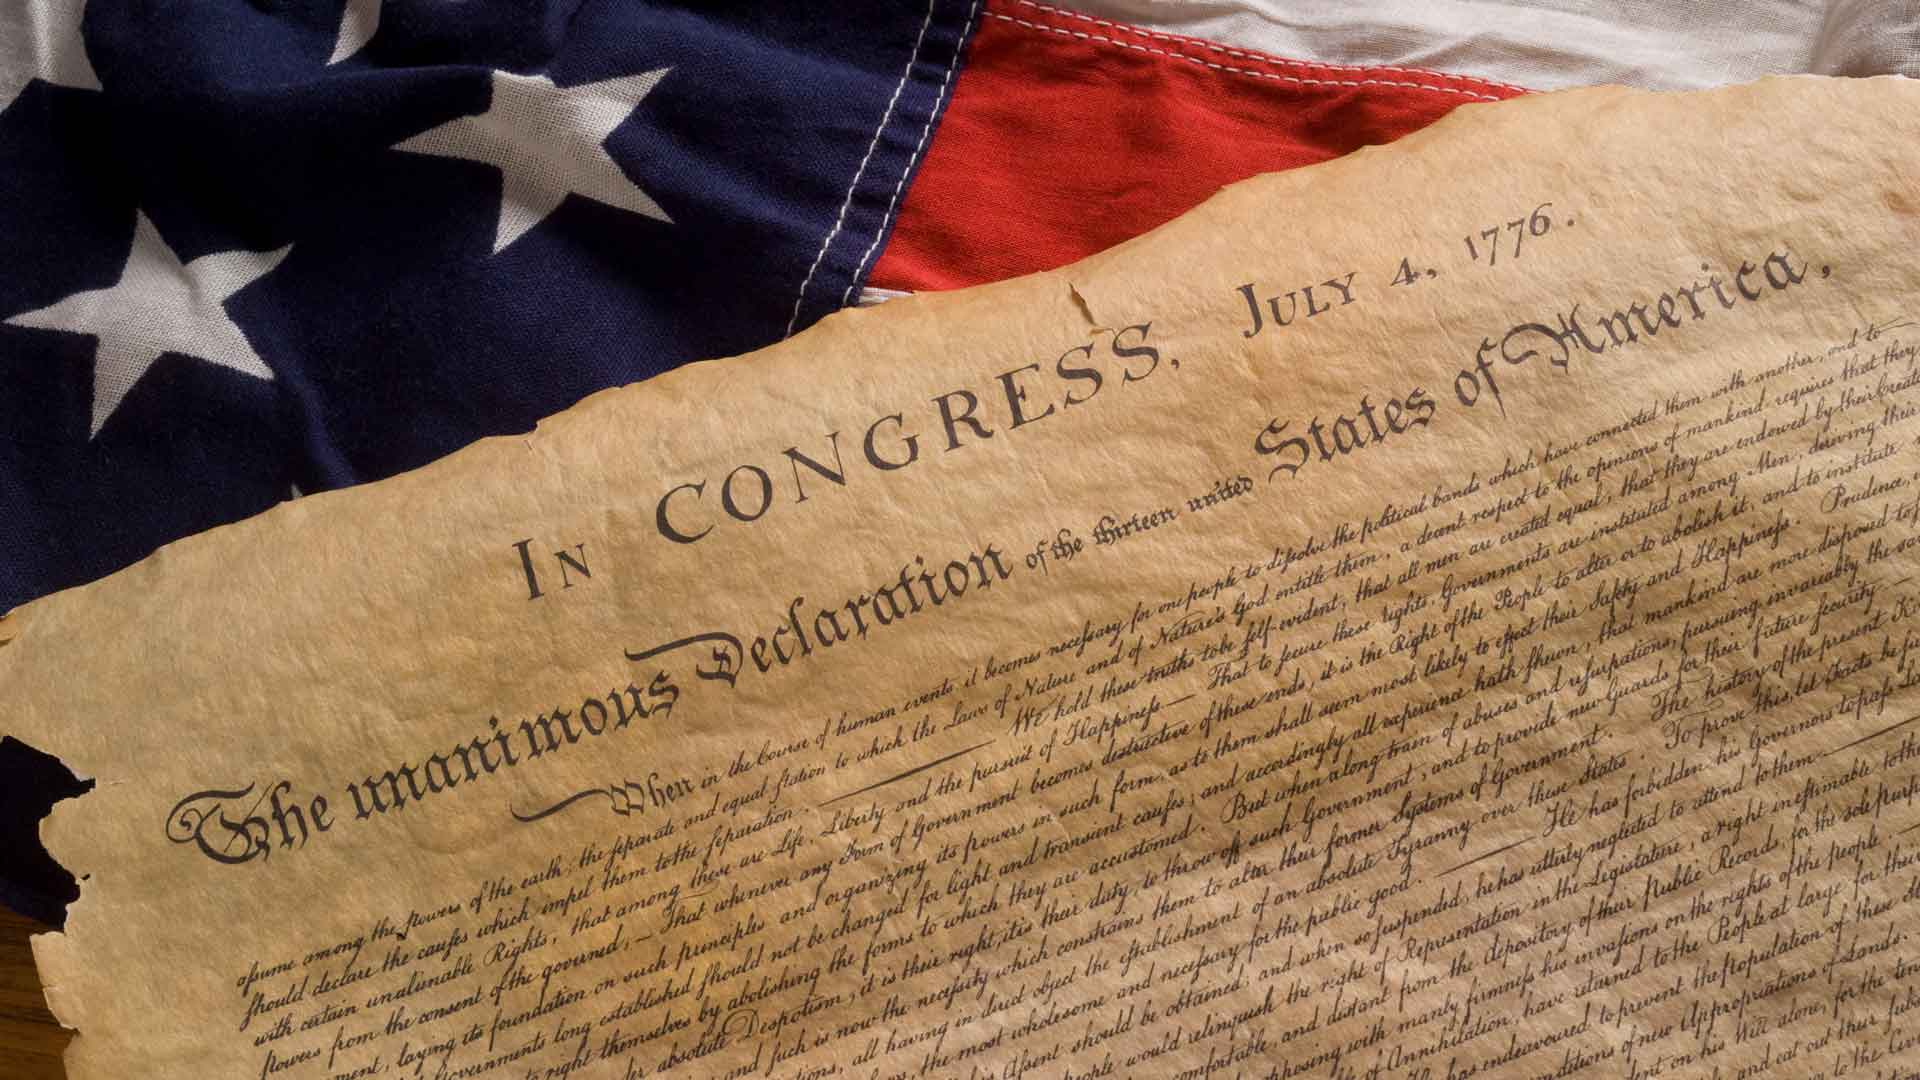 purpose of declaration of independence thesis